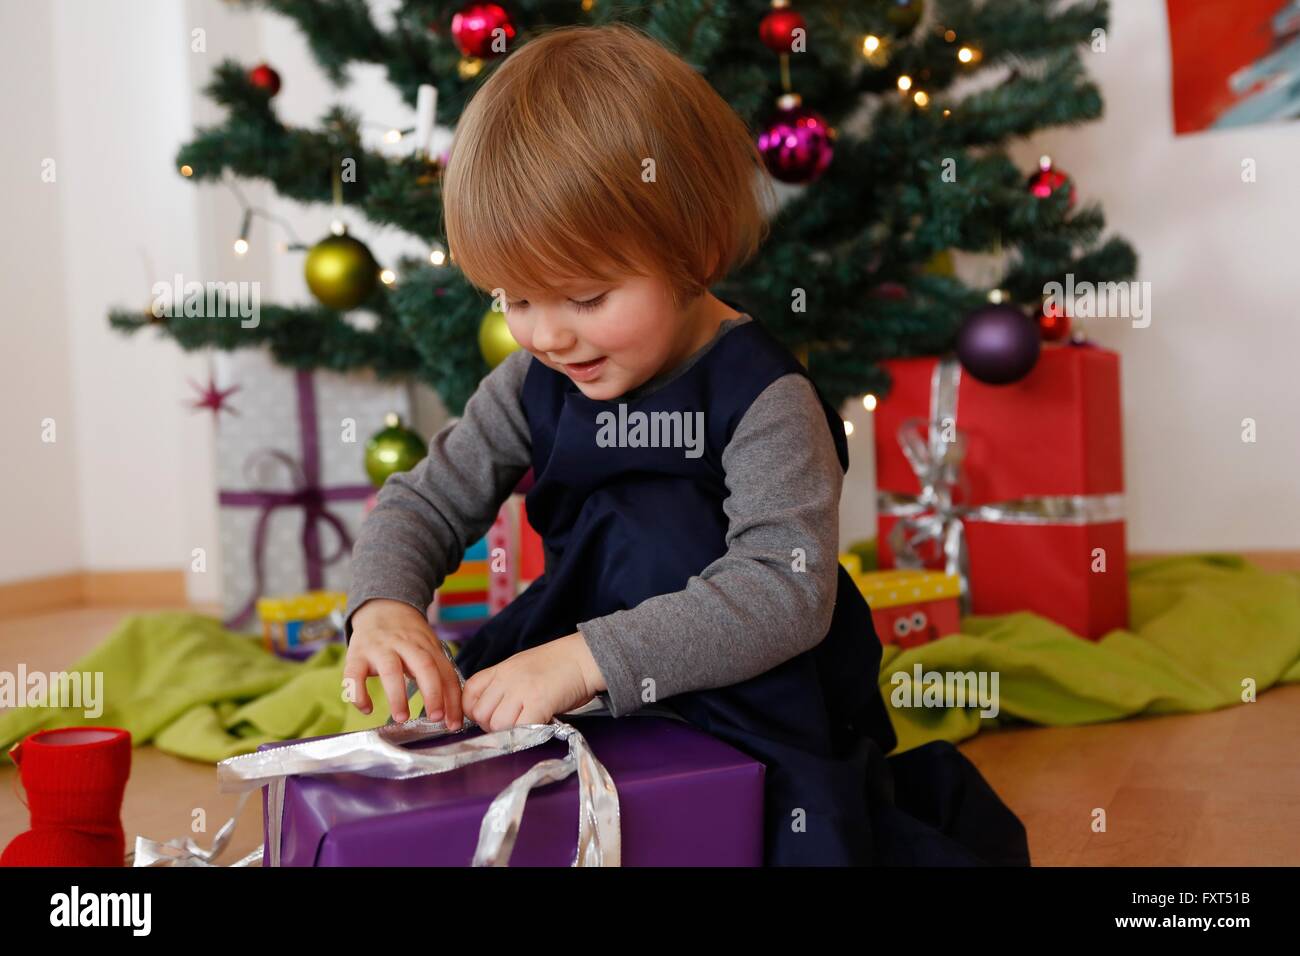 Girl in front of christmas tree looking down opening gifts Stock Photo